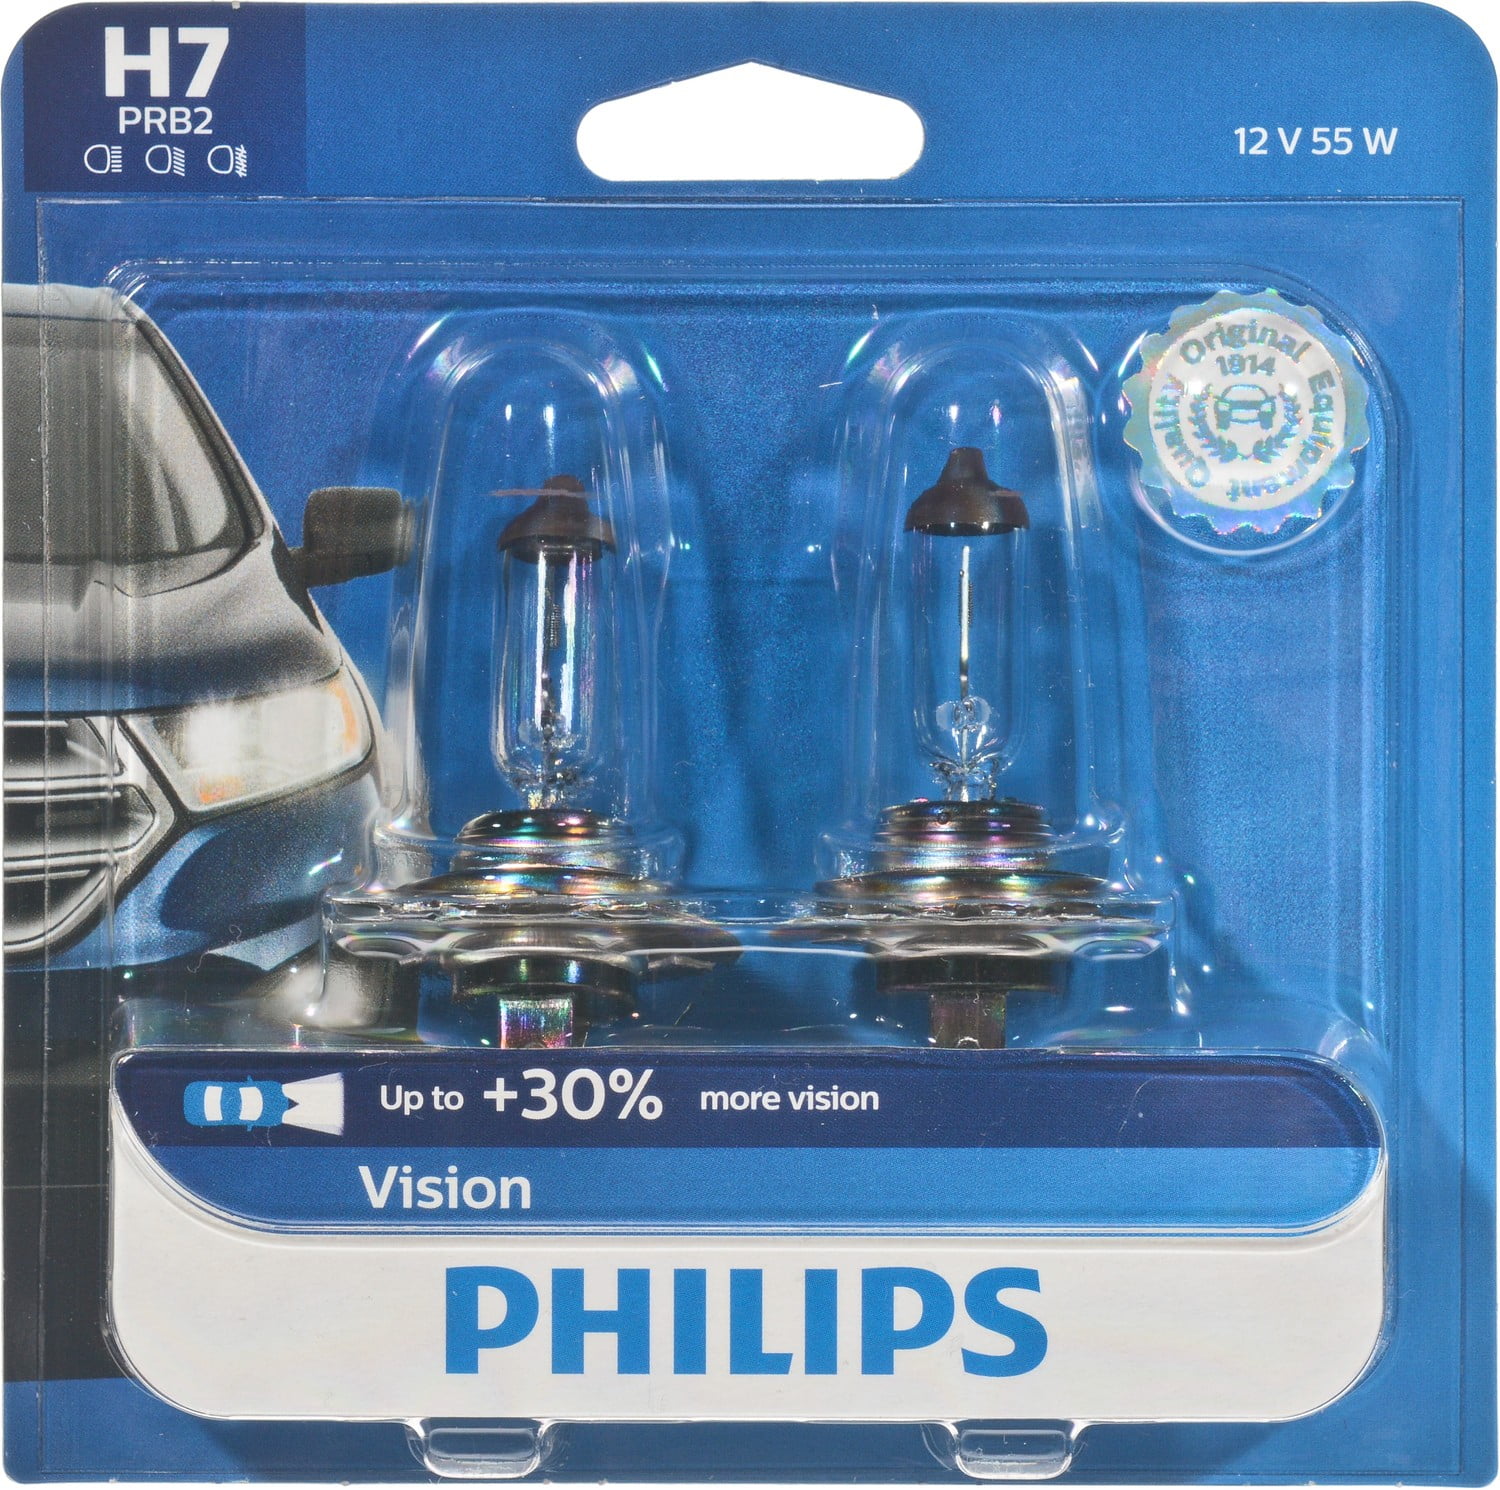 Филипс +30 h7. Philips Vision +30. Philips Vision h7. Philips Vision +30 h11.